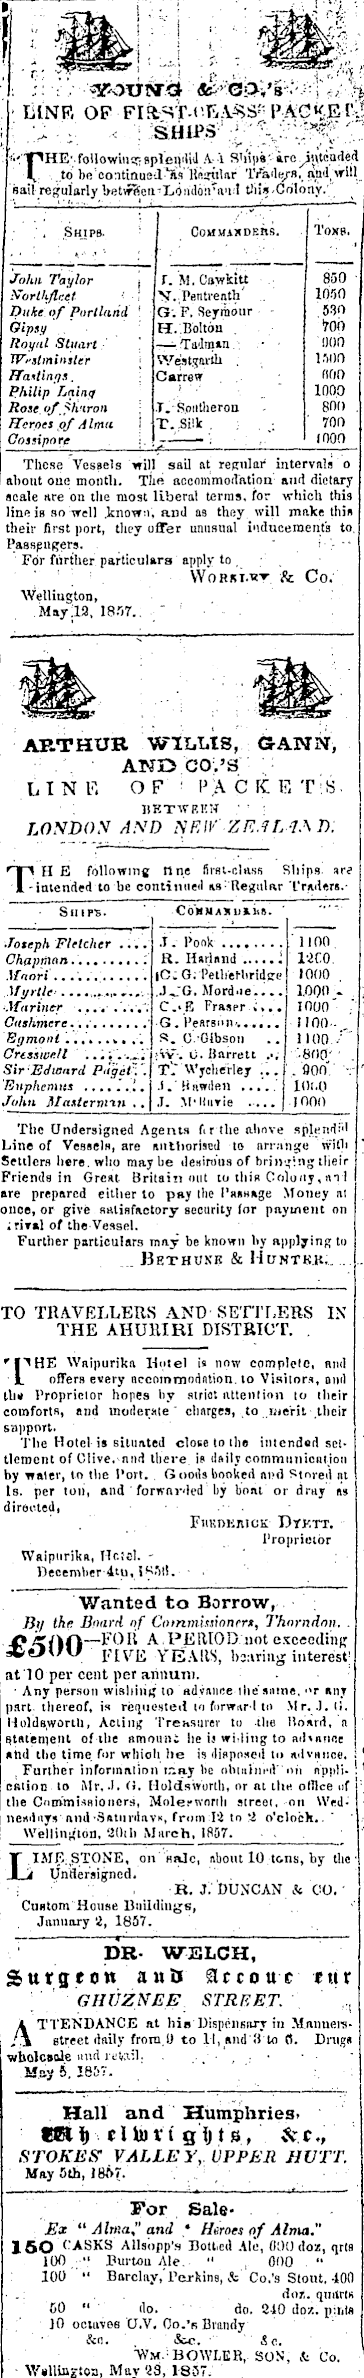 Papers Past Newspapers Wellington Independent 3 June 1857 Page 1 Advertisements Column 3